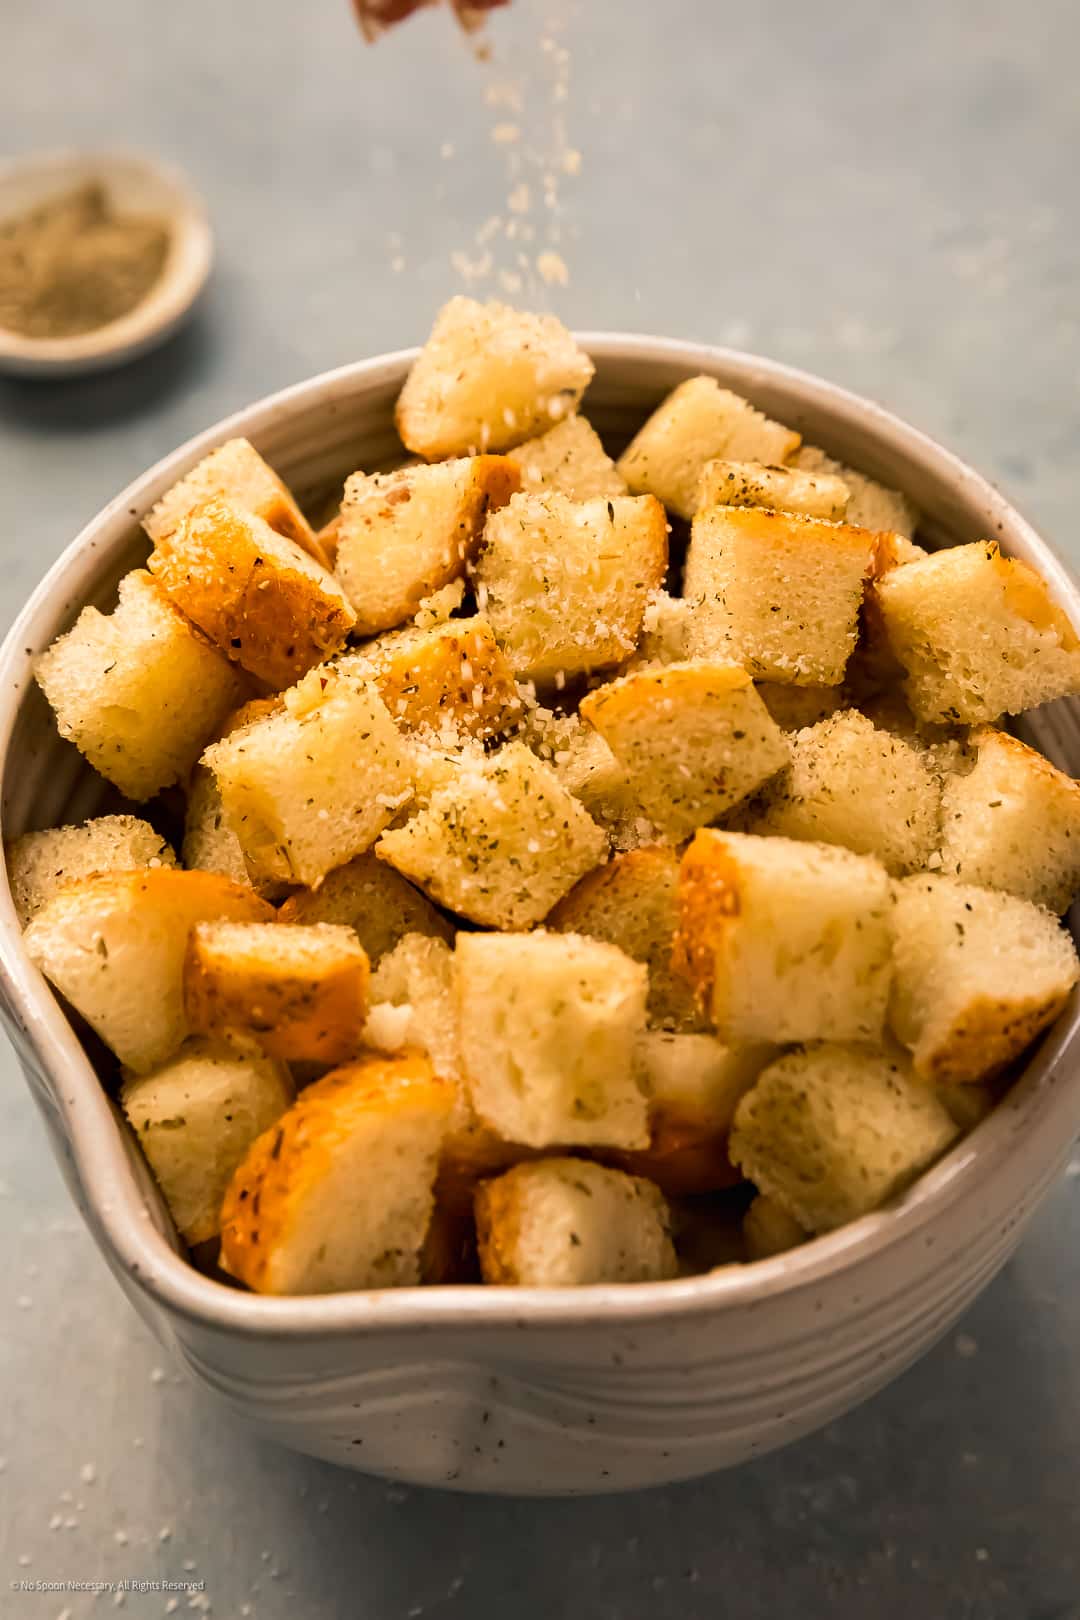 Action photo of a hand sprinkling freshly grated parmesan cheese on a bowl of bread croutons.